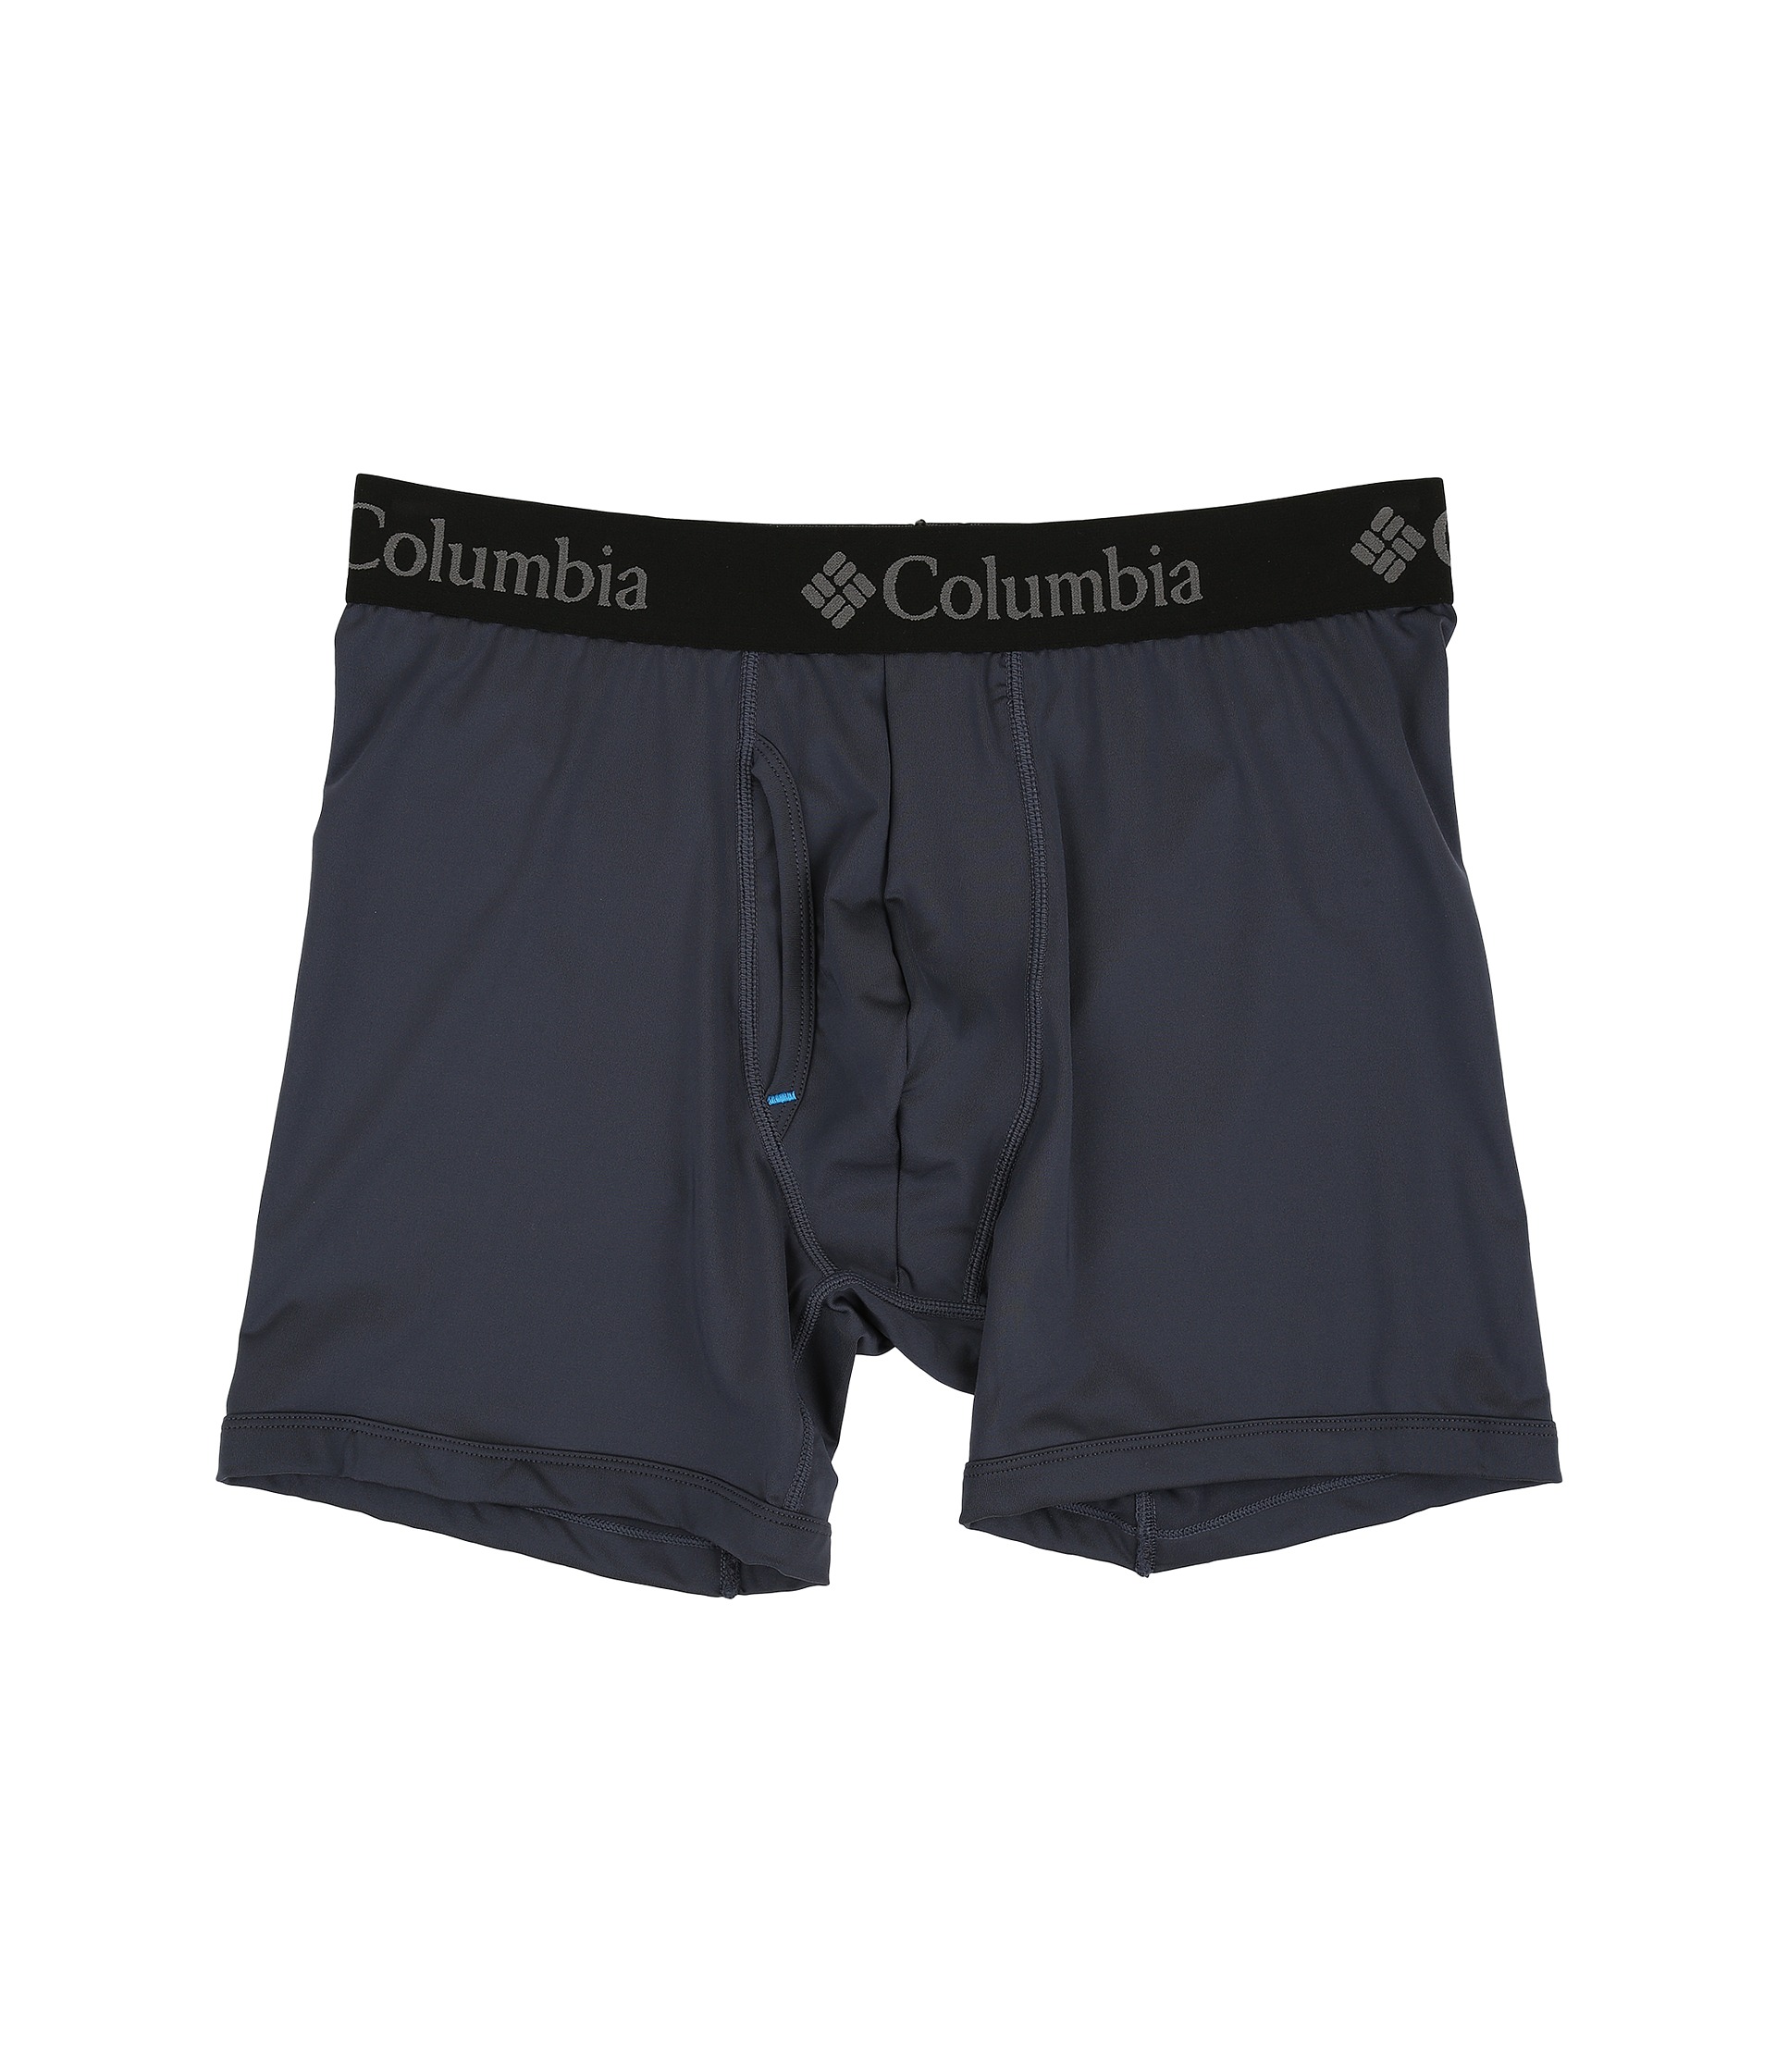 Columbia Performance Stretch Boxer Briefs 2-Pack at Zappos.com